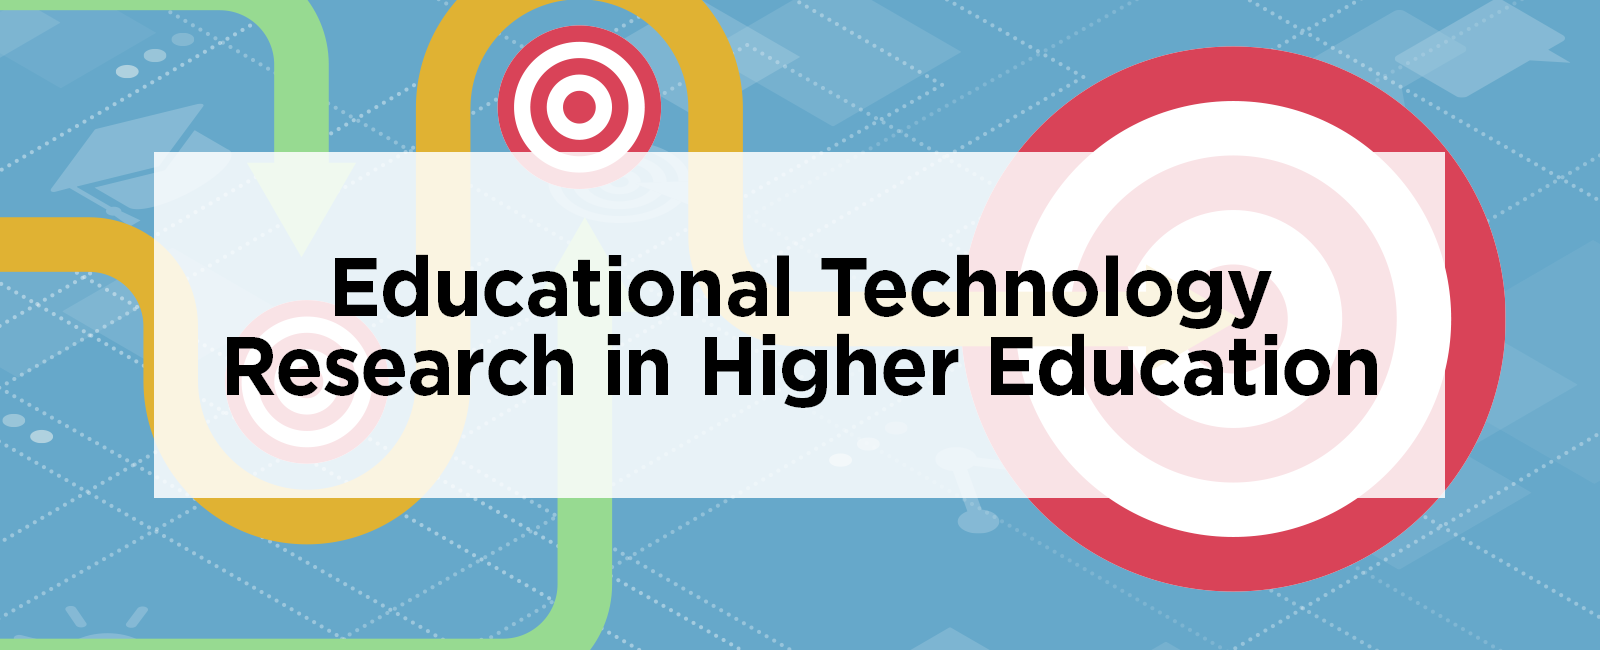 Educational Technology Research in Higher Education: New Considerations and Evolving Goals